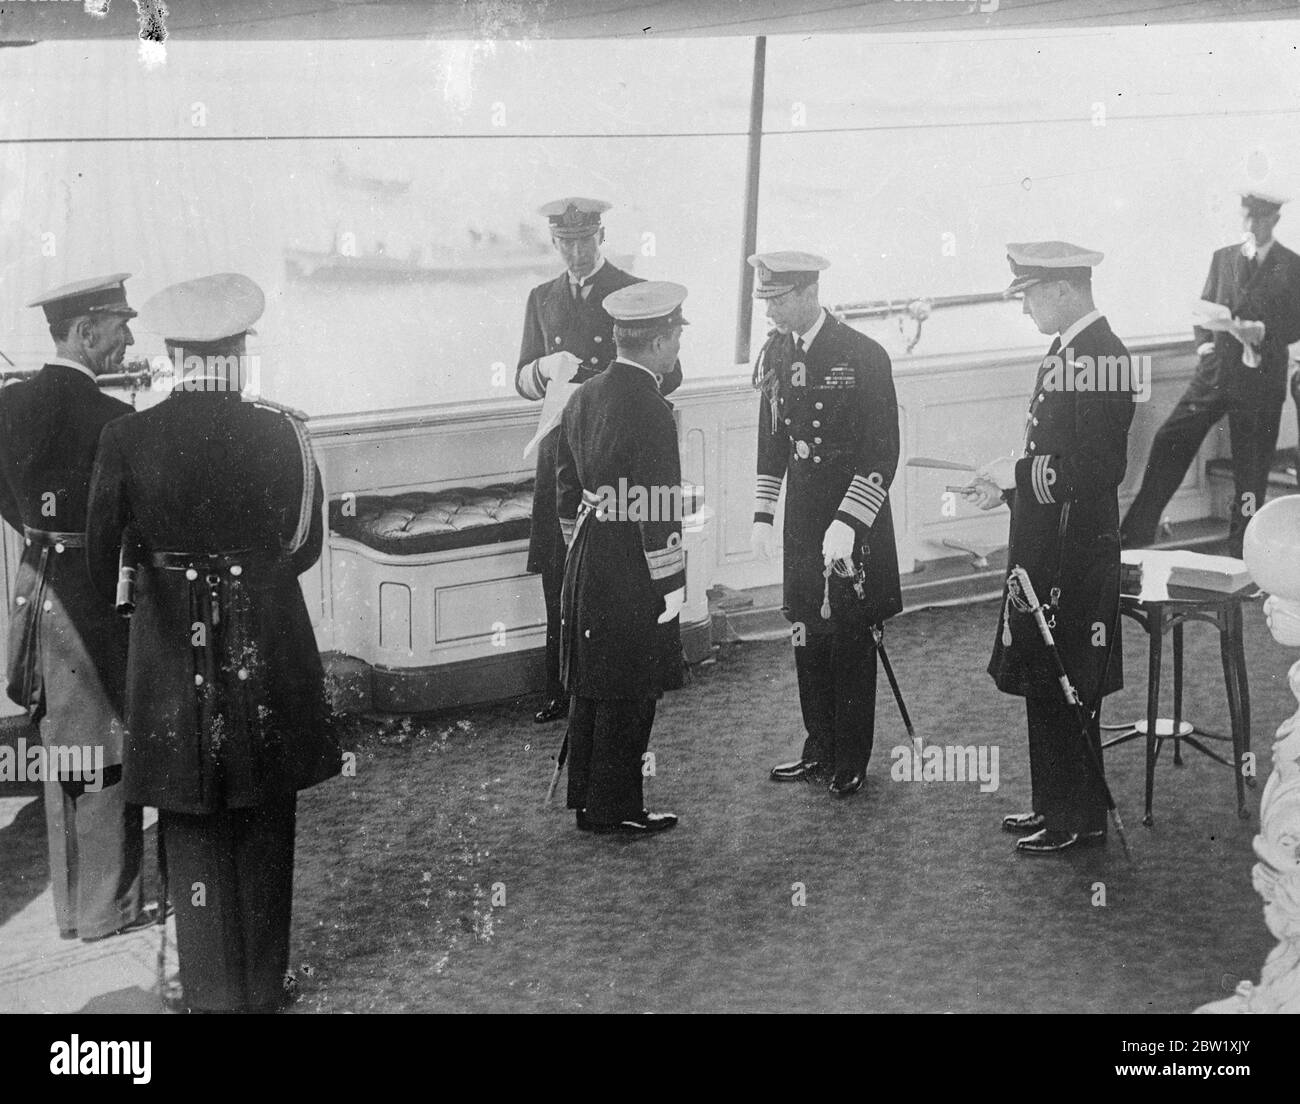 King received Japanese Adml on Royal Naval yacht before full fleet review. The King, who was accompanied by other members of the Royal family, received British and foreign of visiting warships on the quarter deck of the Royal yacht 'Victoria and Albert' for Coronation naval review and you at Portsmouth. Photo shows, the King receiving the commander of the Japanese cruiser 'Ashigara' on the Royal yacht 'Victoria and Albert'. 20 May 1937 Stock Photo